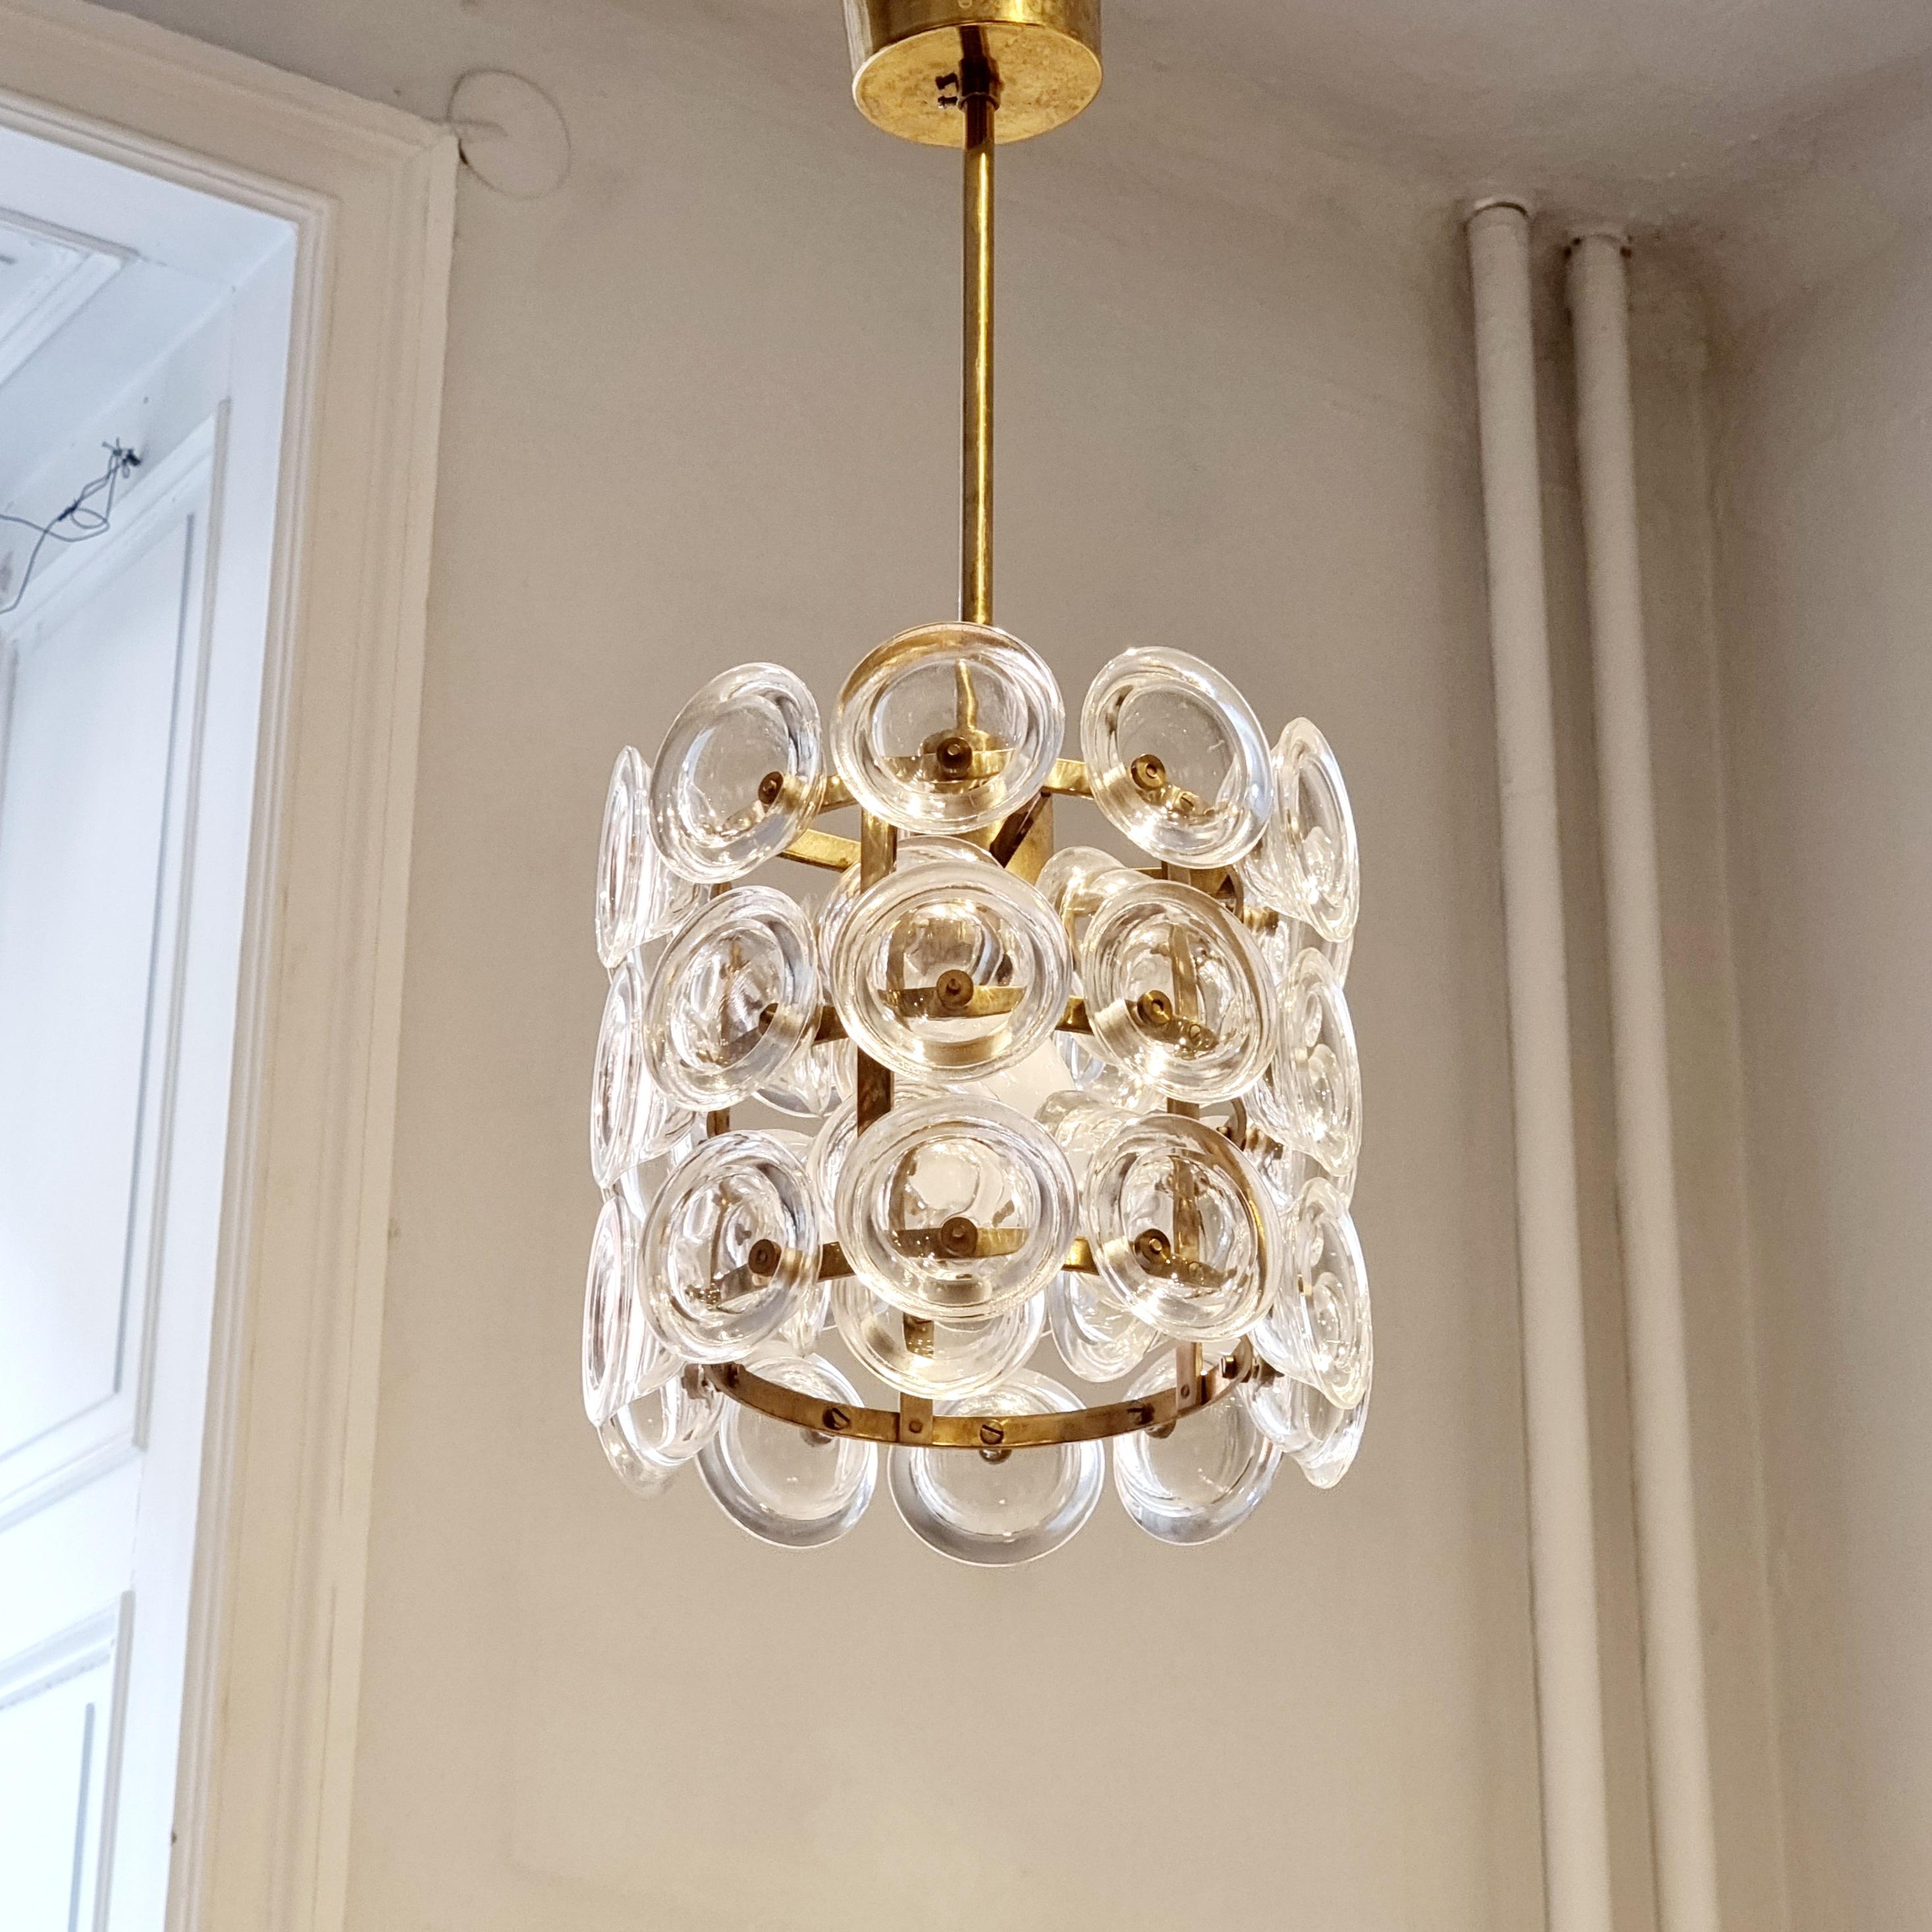 Carl Fagerlund, Glass & Brass Pendant, Fagerhult/Orrefors, Scandinavian Modern In Good Condition For Sale In Stockholm, SE